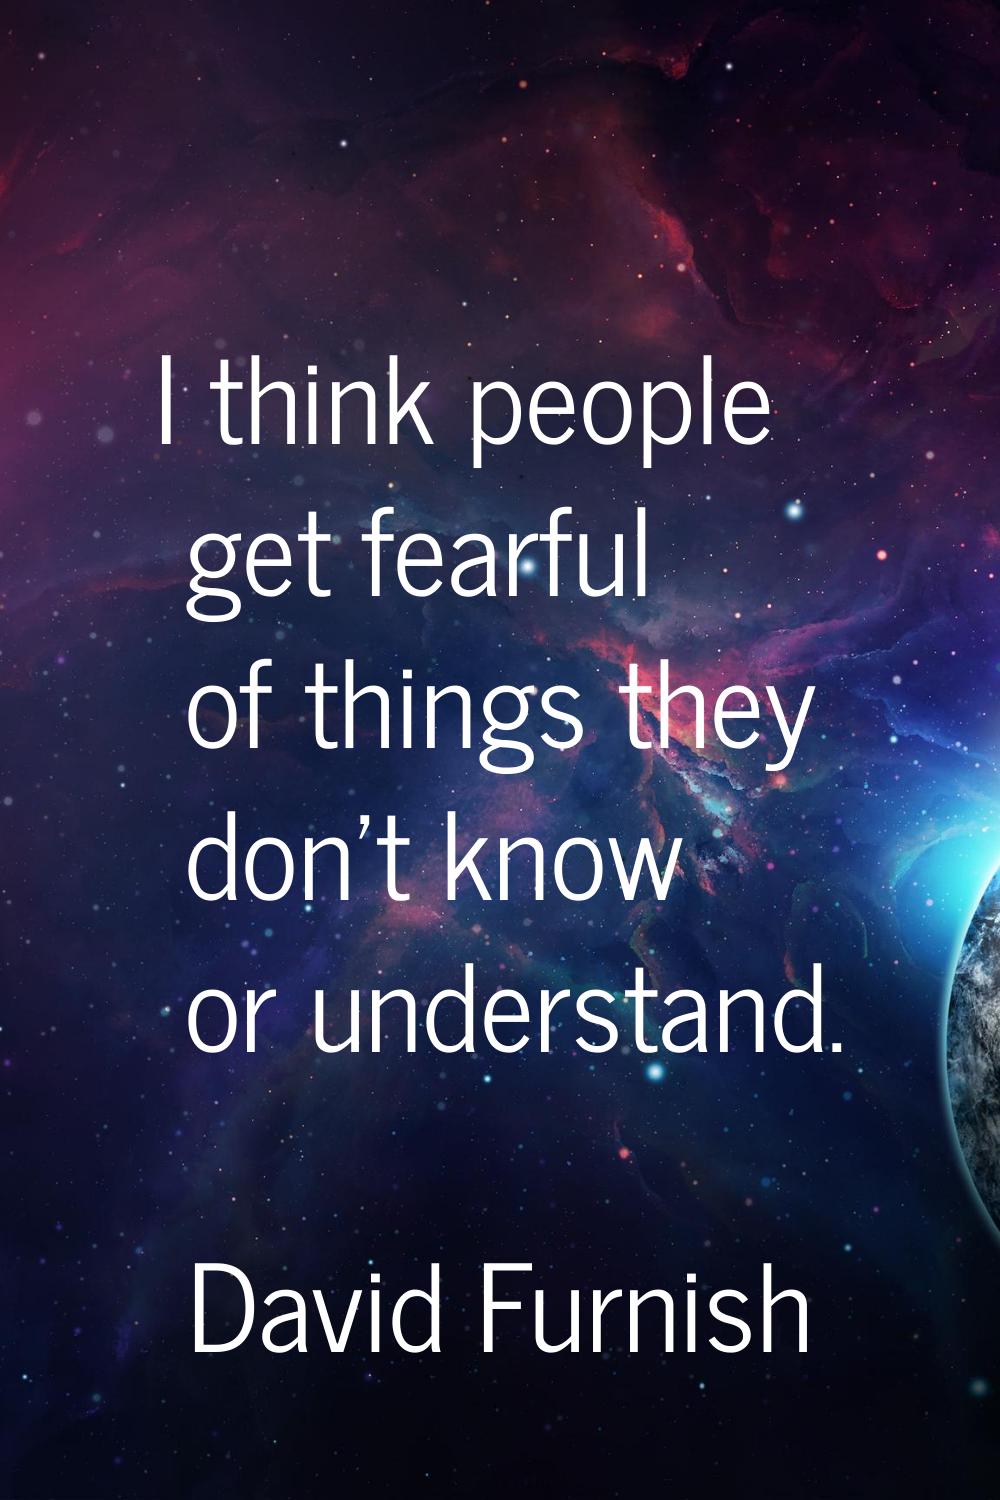 I think people get fearful of things they don't know or understand.